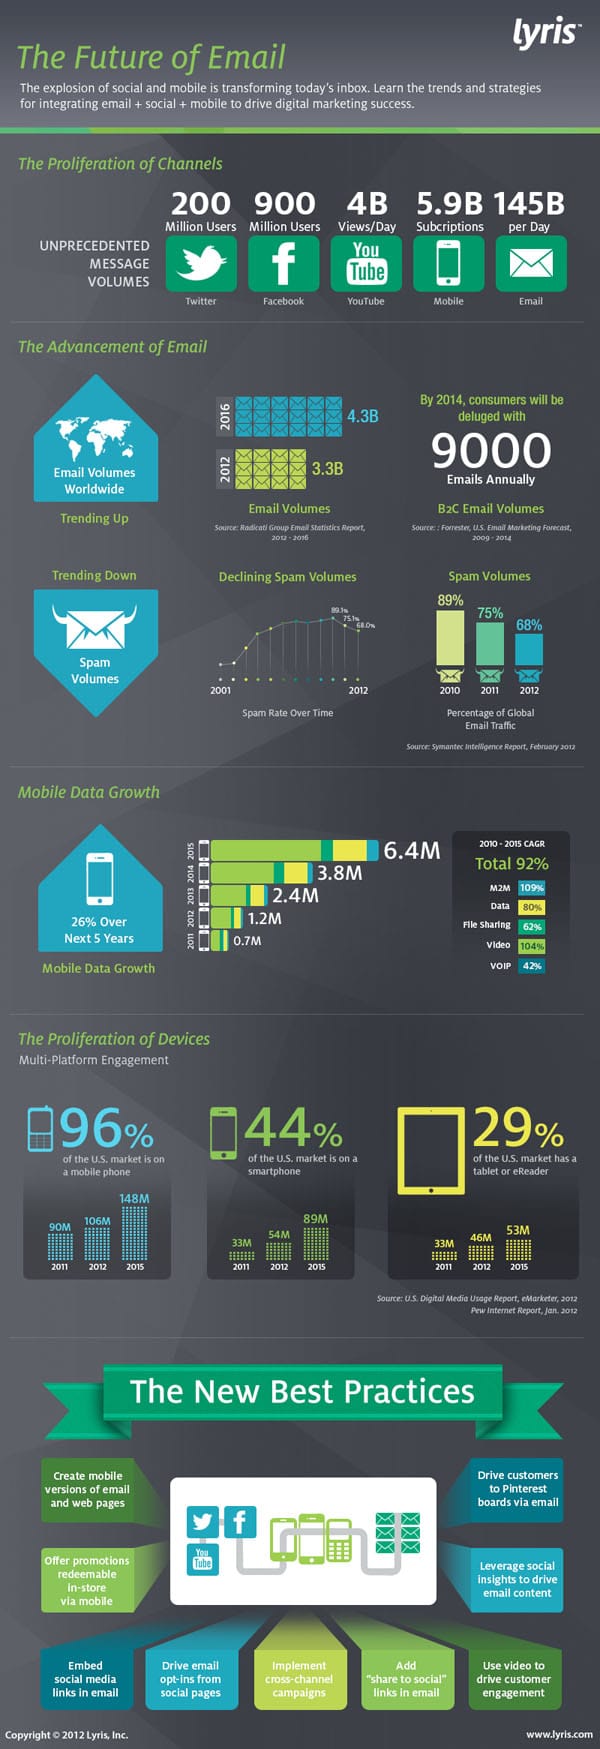 The Future Of Email: Best Practices & Trends [Infographic]